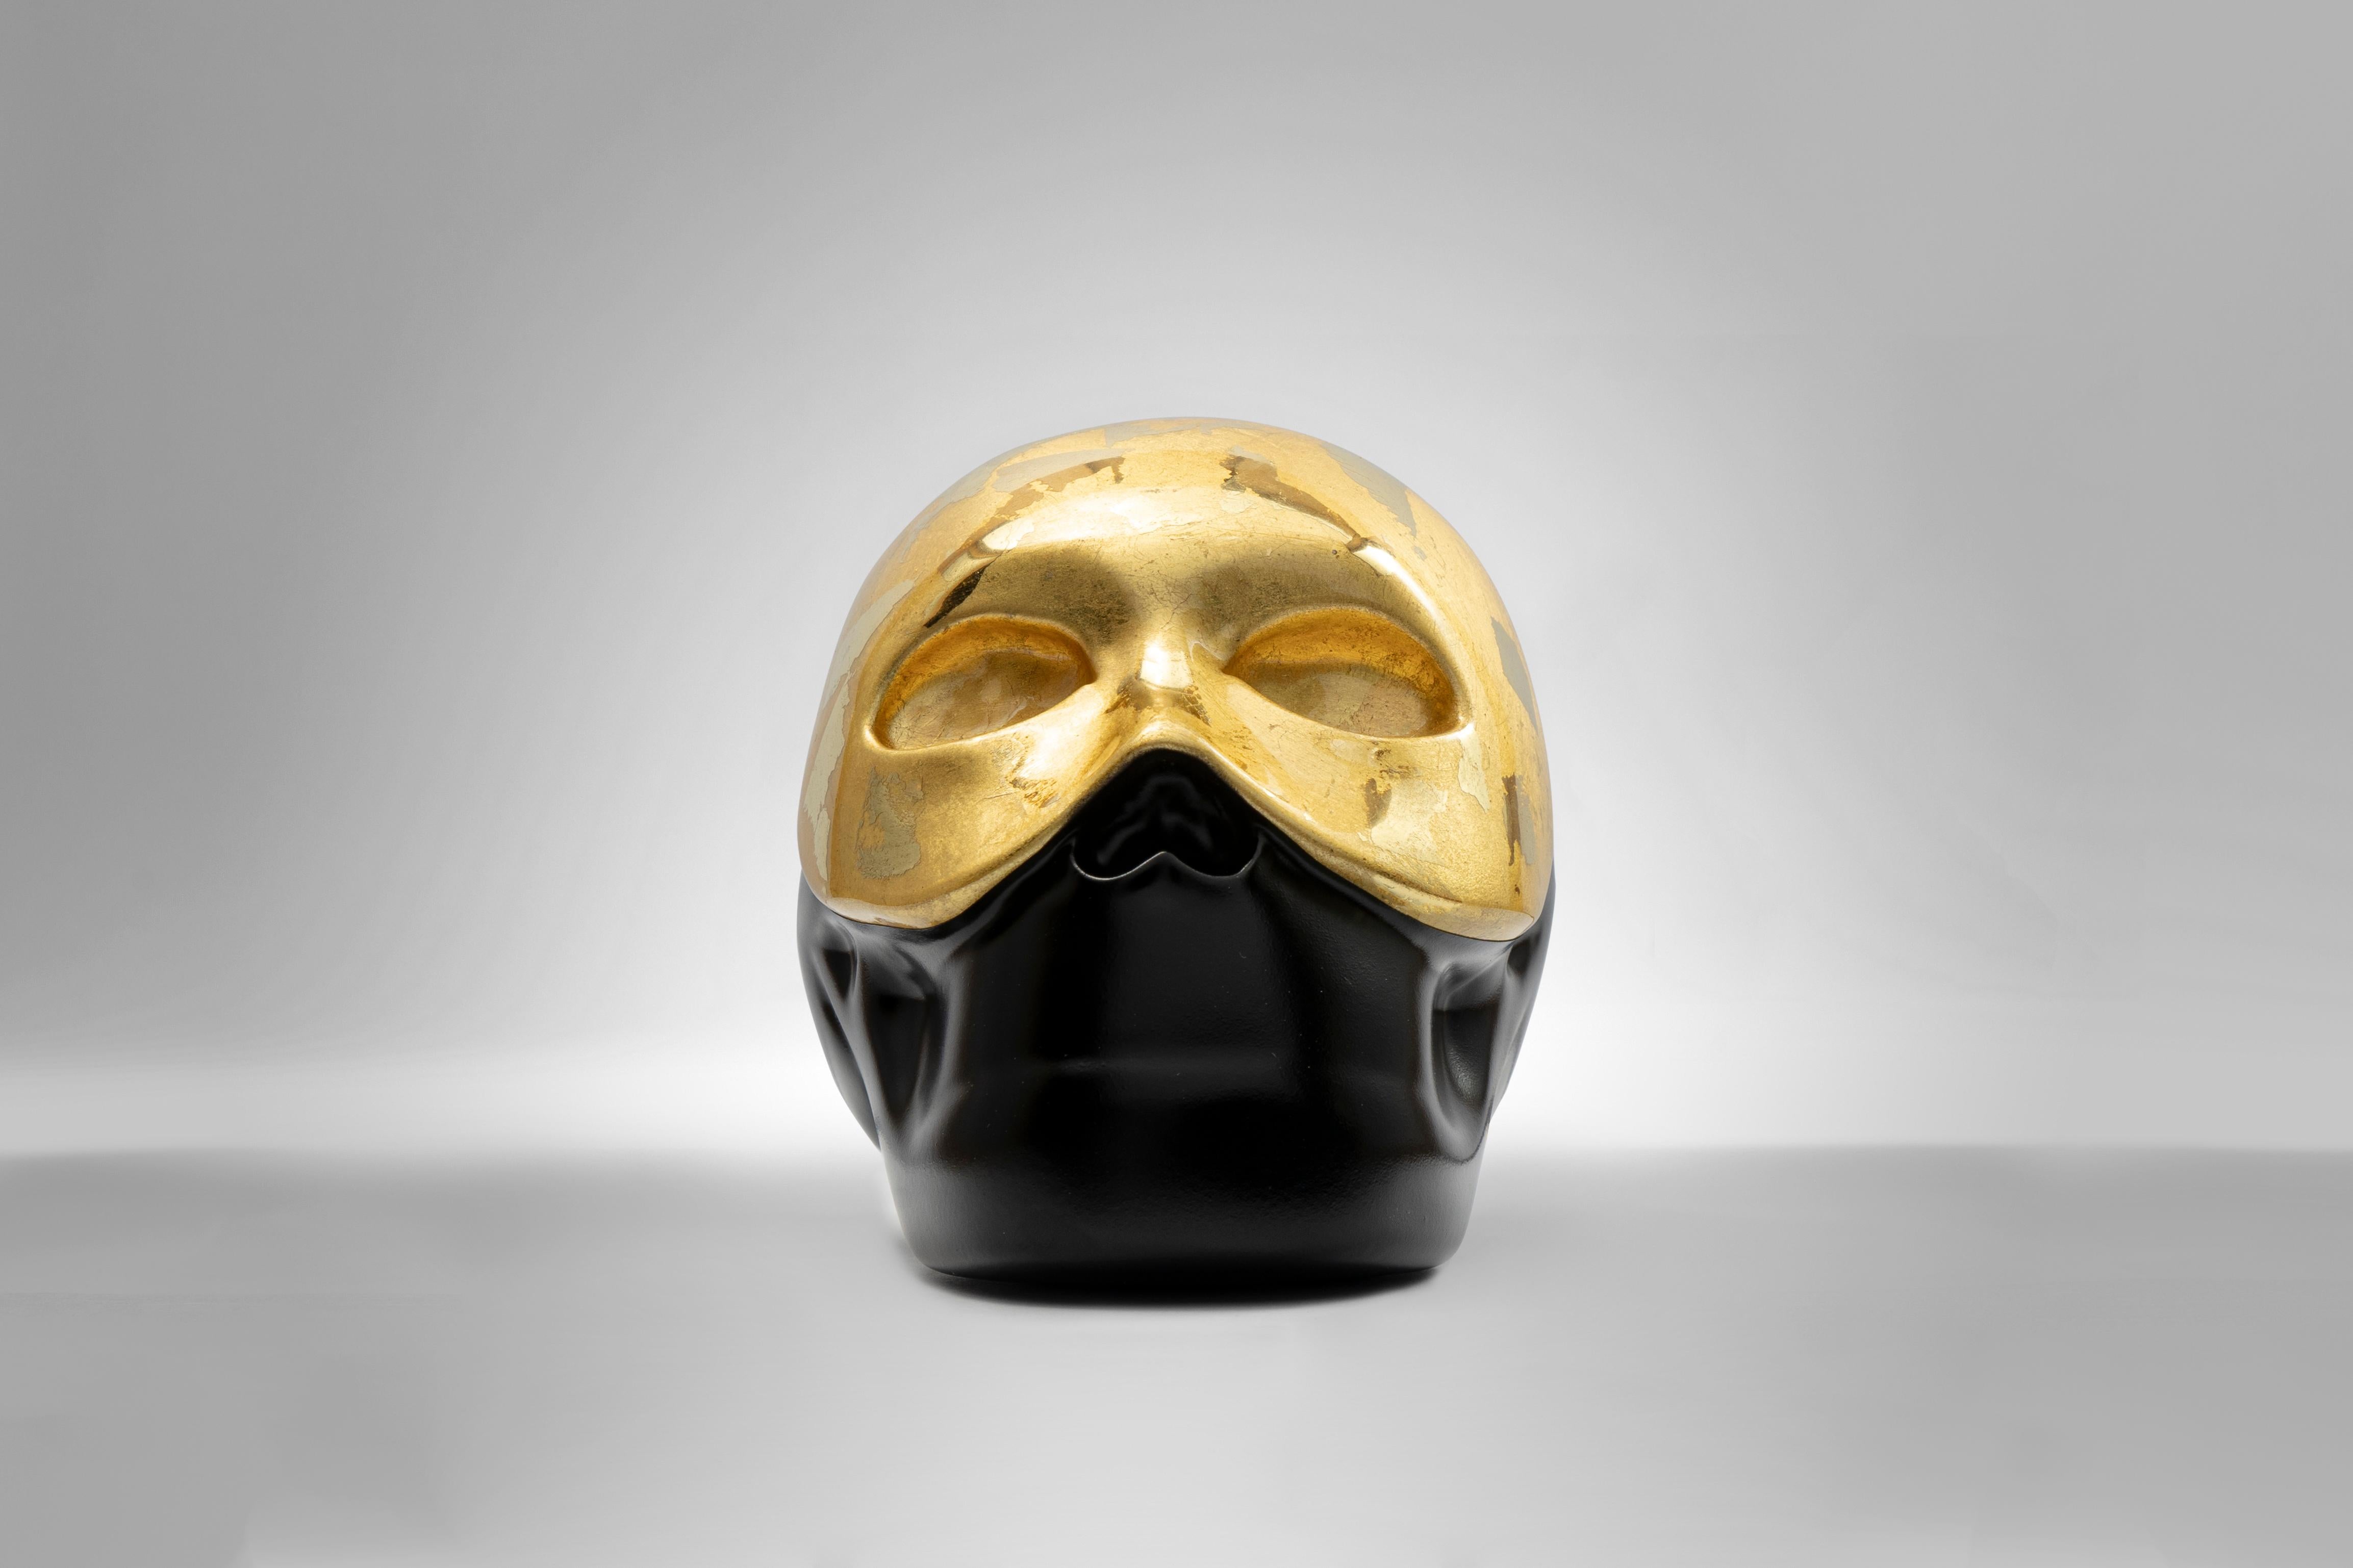 - THE SKULL - GOLDEN LINING
In the realm of enchantment, gold dances with darkness.
_______________________________________________
Hand-crafted from bi-component resin by italian craftsmen.
Dimensions: 9x14x10 (w,d,h)

Shimmering ebony threads